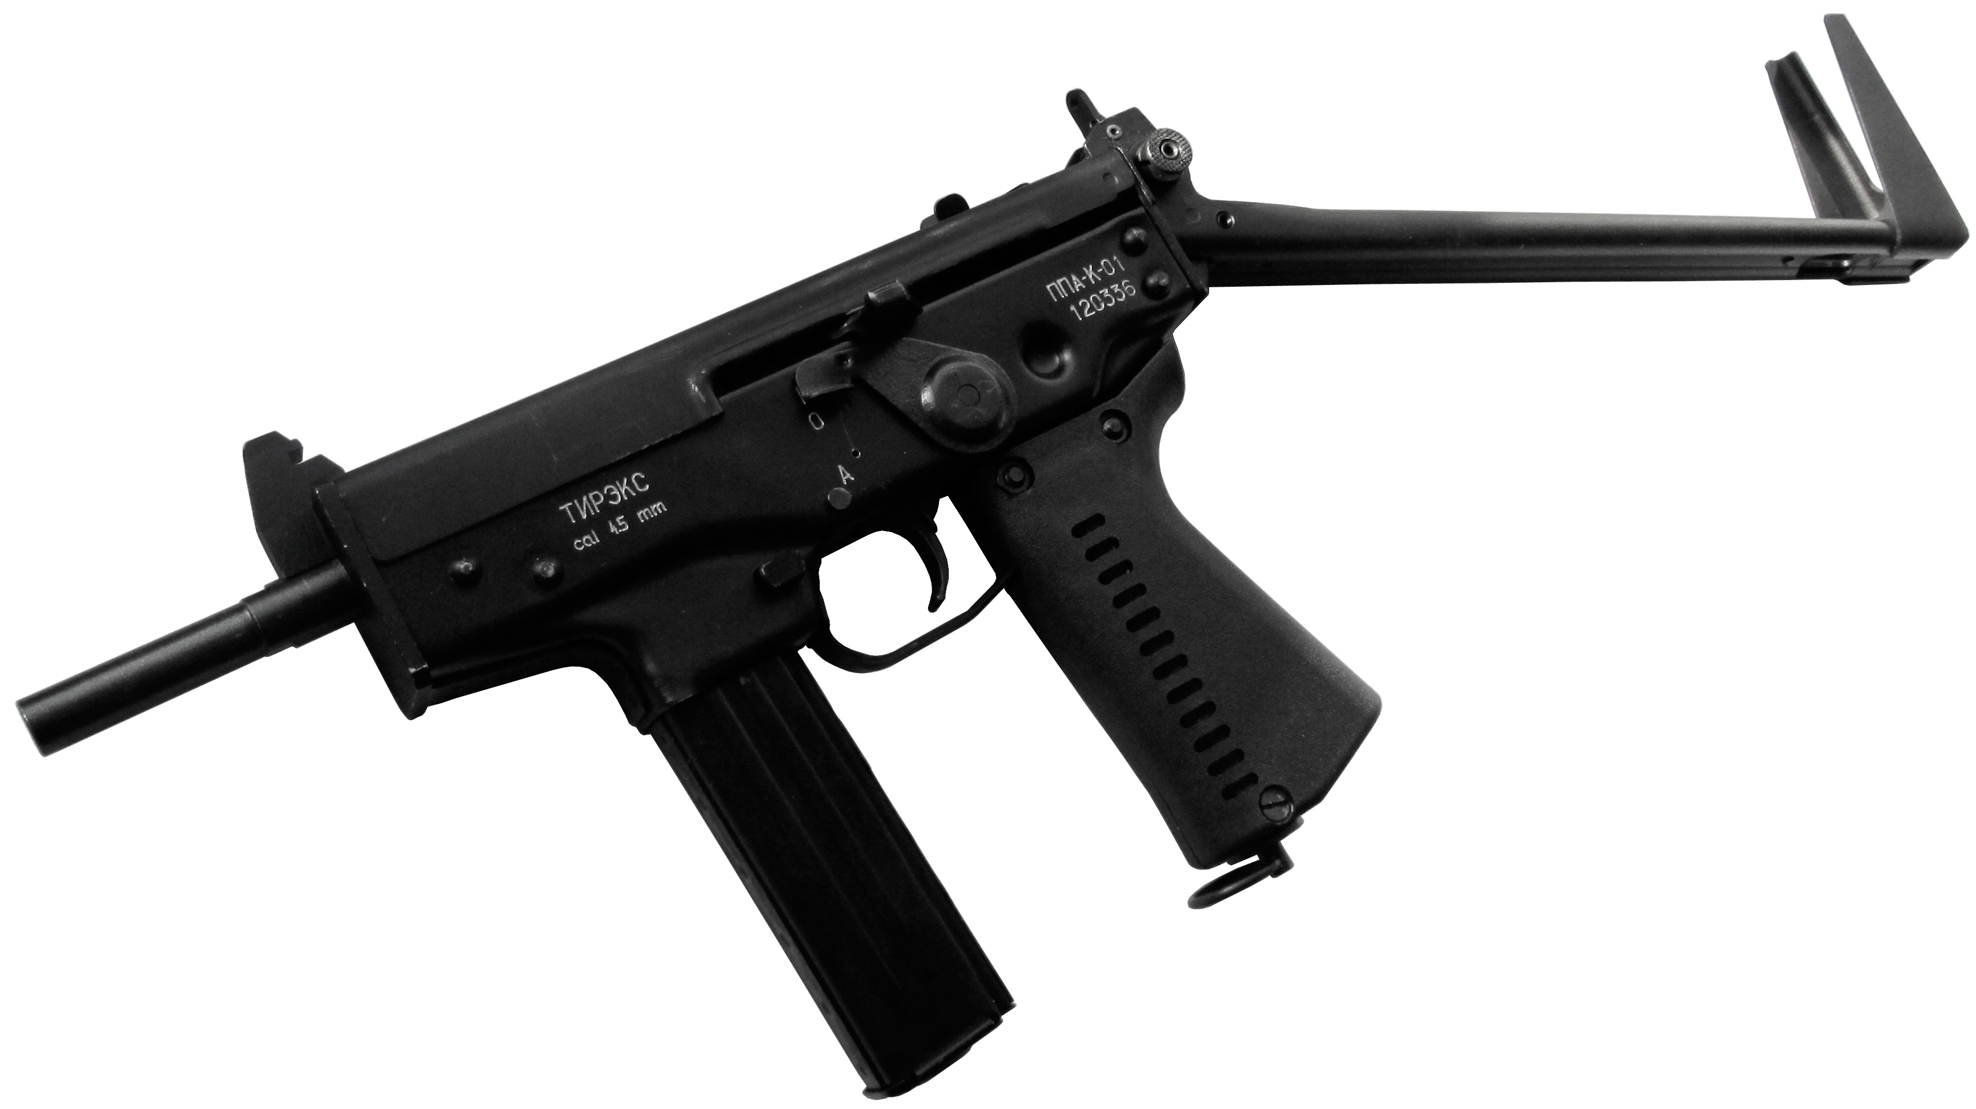 Arsenal Firearms and Cybergun sign an agreement for AF-2011 A1 replicas!